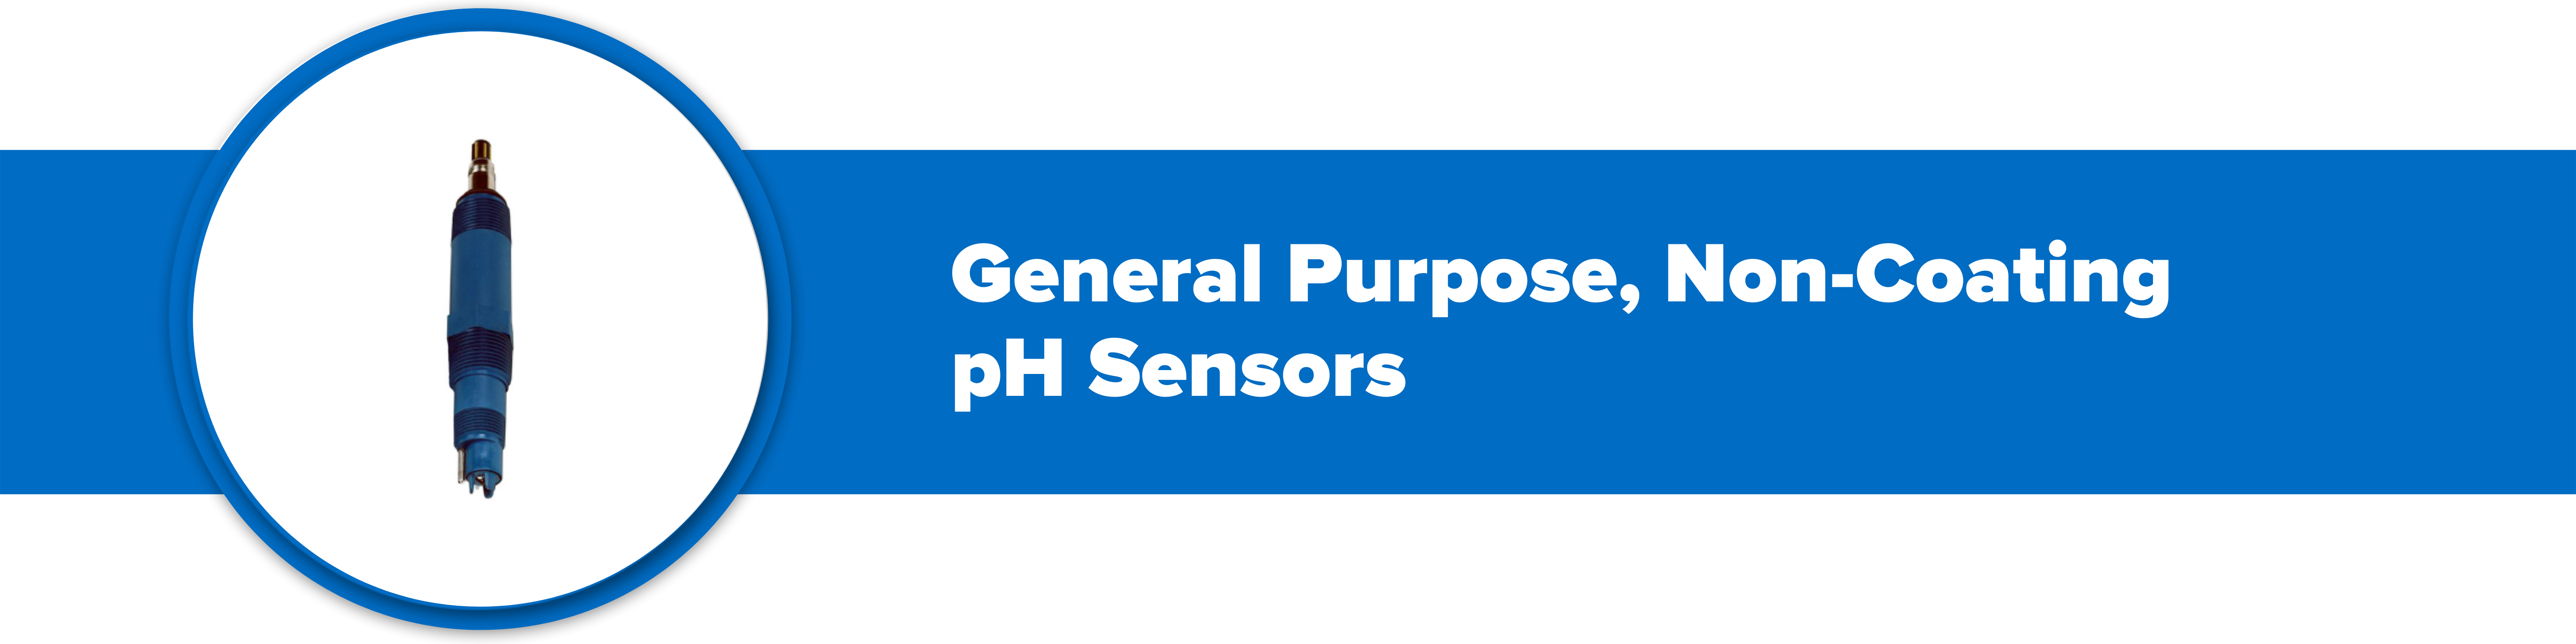 Header image with text 'general purpose, non-coating pH sensors'.